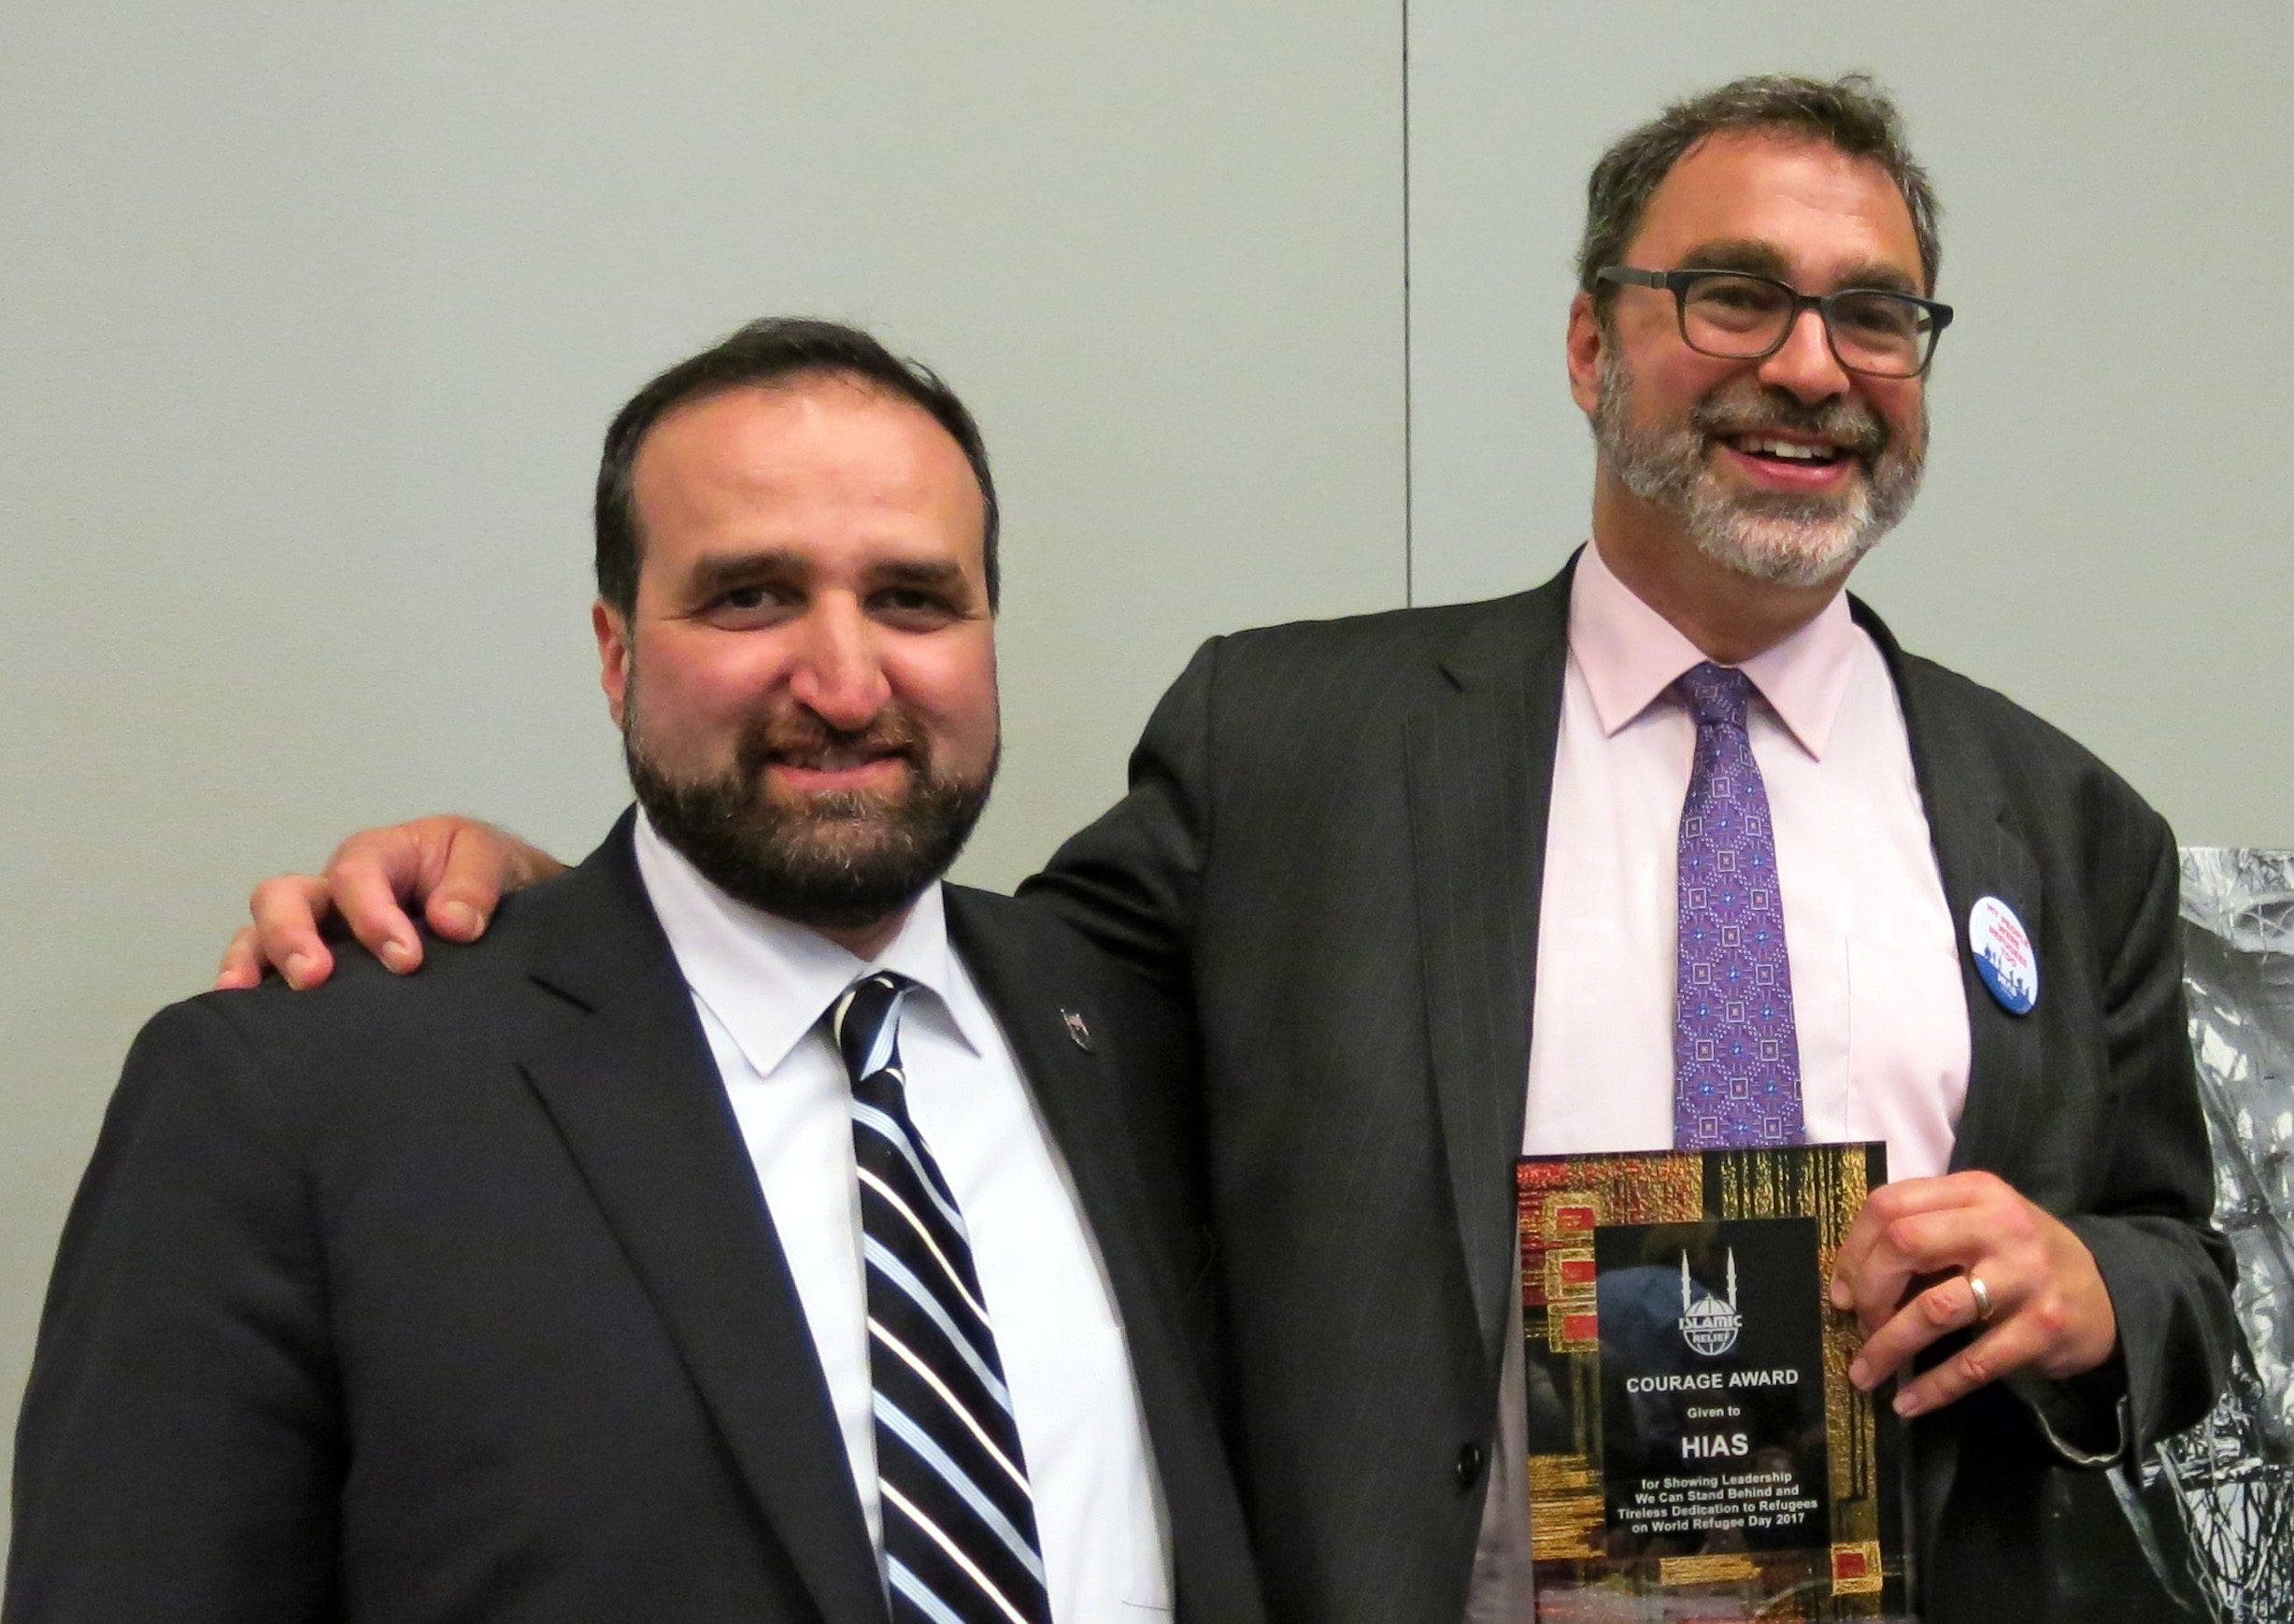 HIAS Receives Courage Award from Islamic Relief USA for “Tireless Work Assisting Refugees”